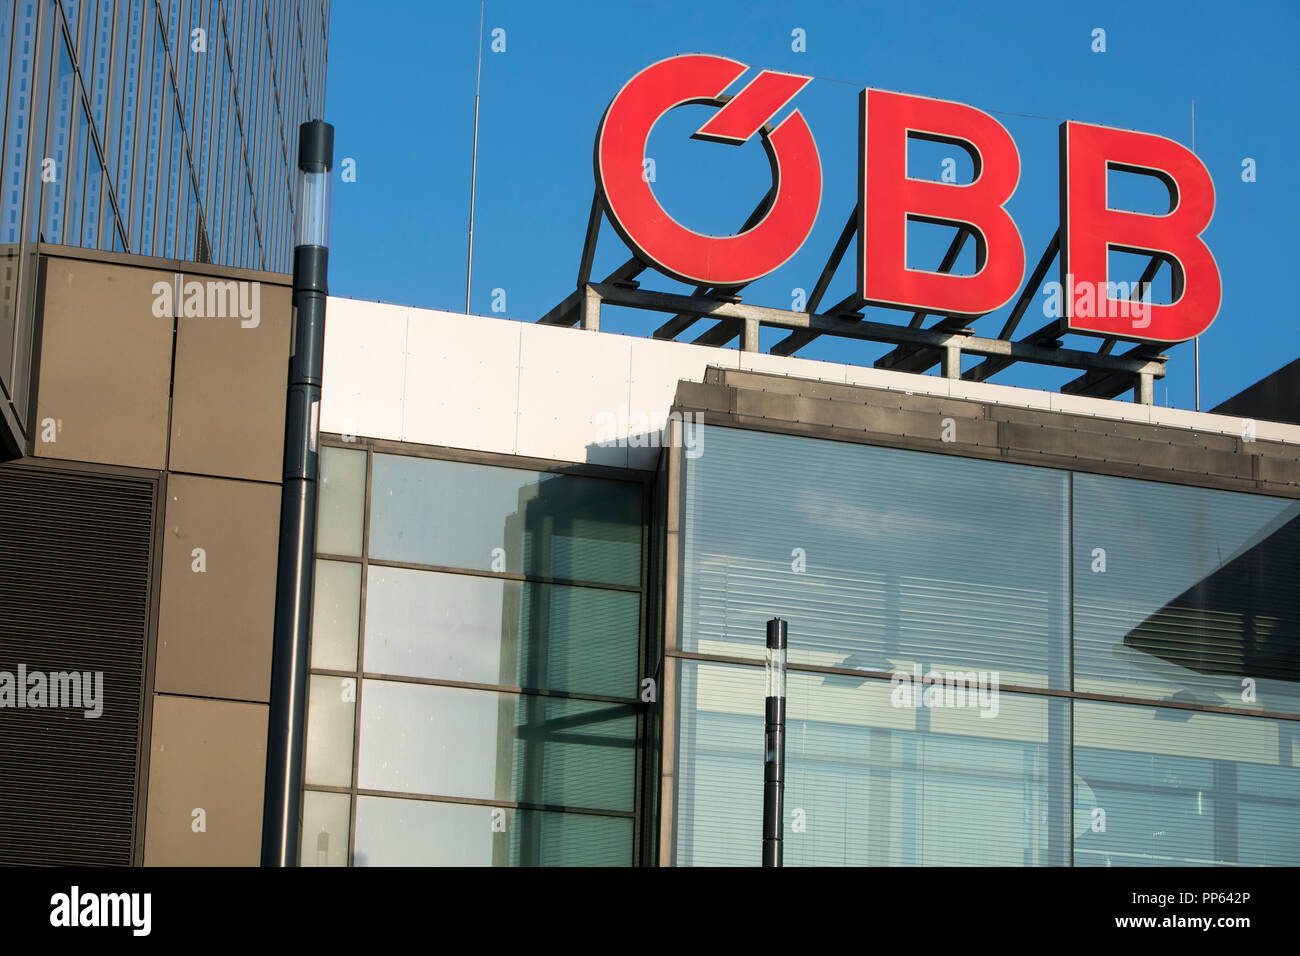 A logo sign outside of a OBB (Austrian Federal Railways) station in Vienna, Austria, on September 5, 2018. Stock Photo